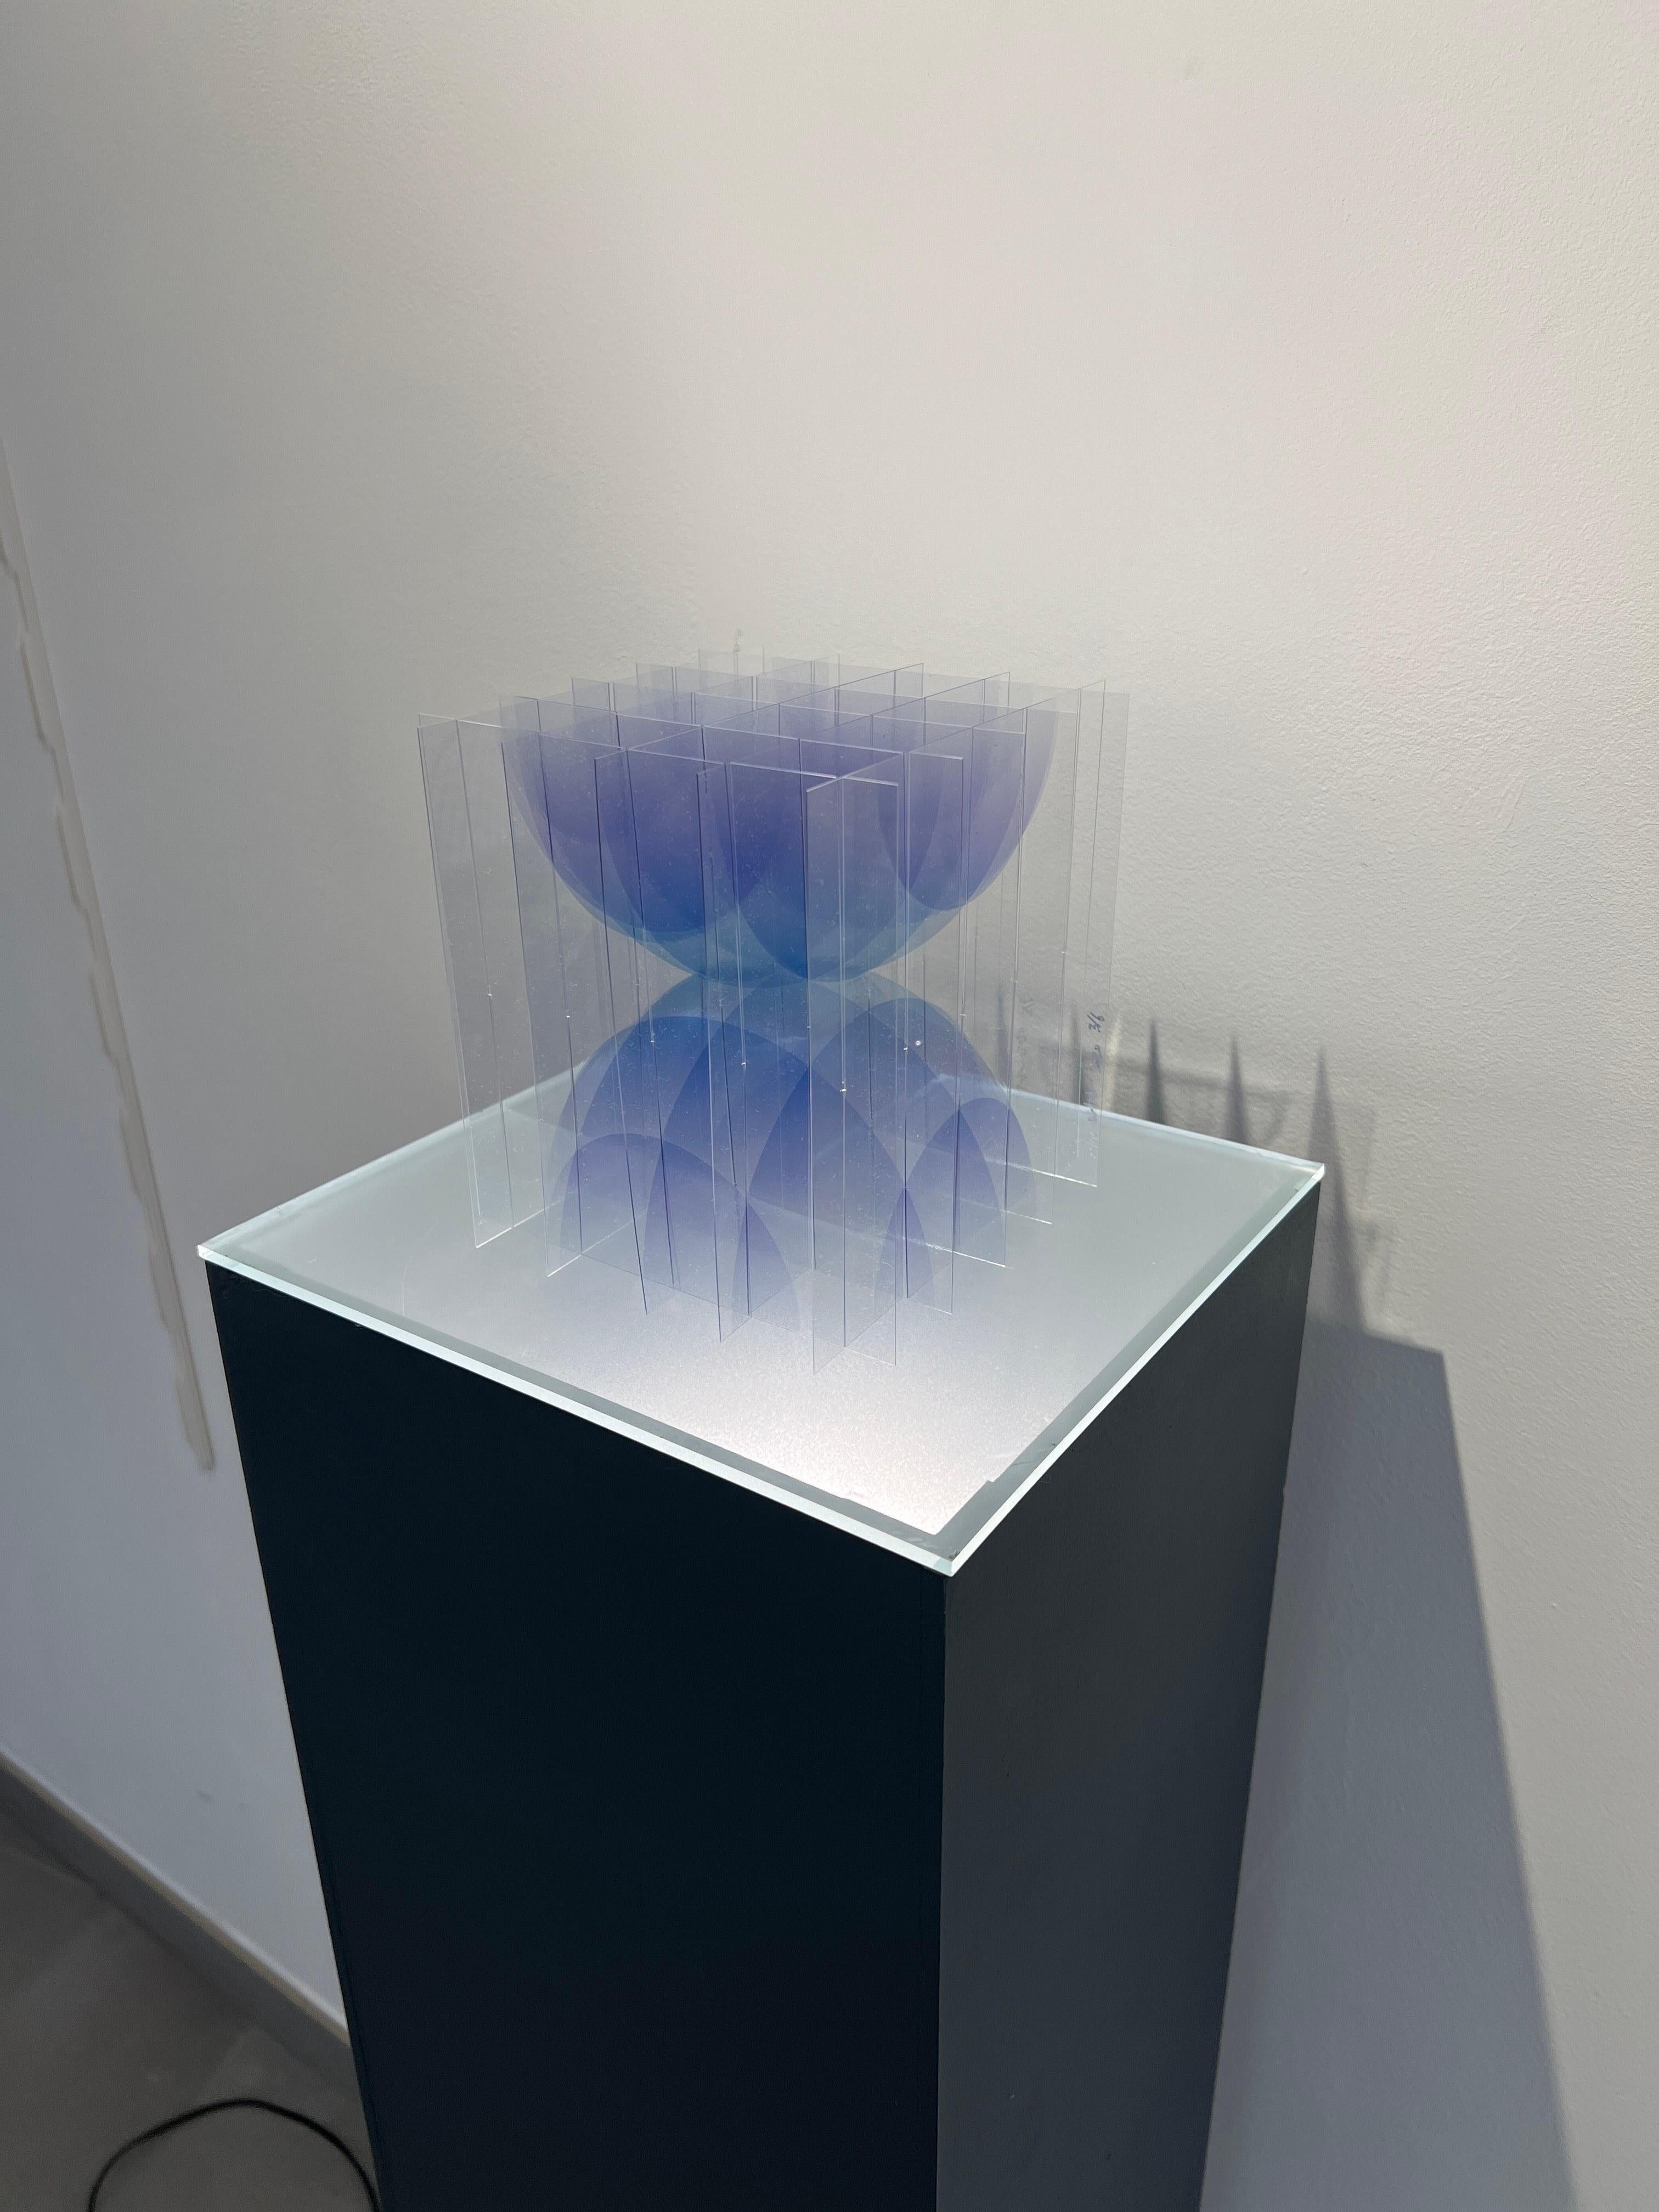 Origami like sculture (it folds completely flat). Provides a fun and strong visual illusion, with a jelly look.
Signed and numbered 3/6, dated 2020. 
Led pedestal comes extra.  Although optional, we strongly recommend it (looks wonderful in